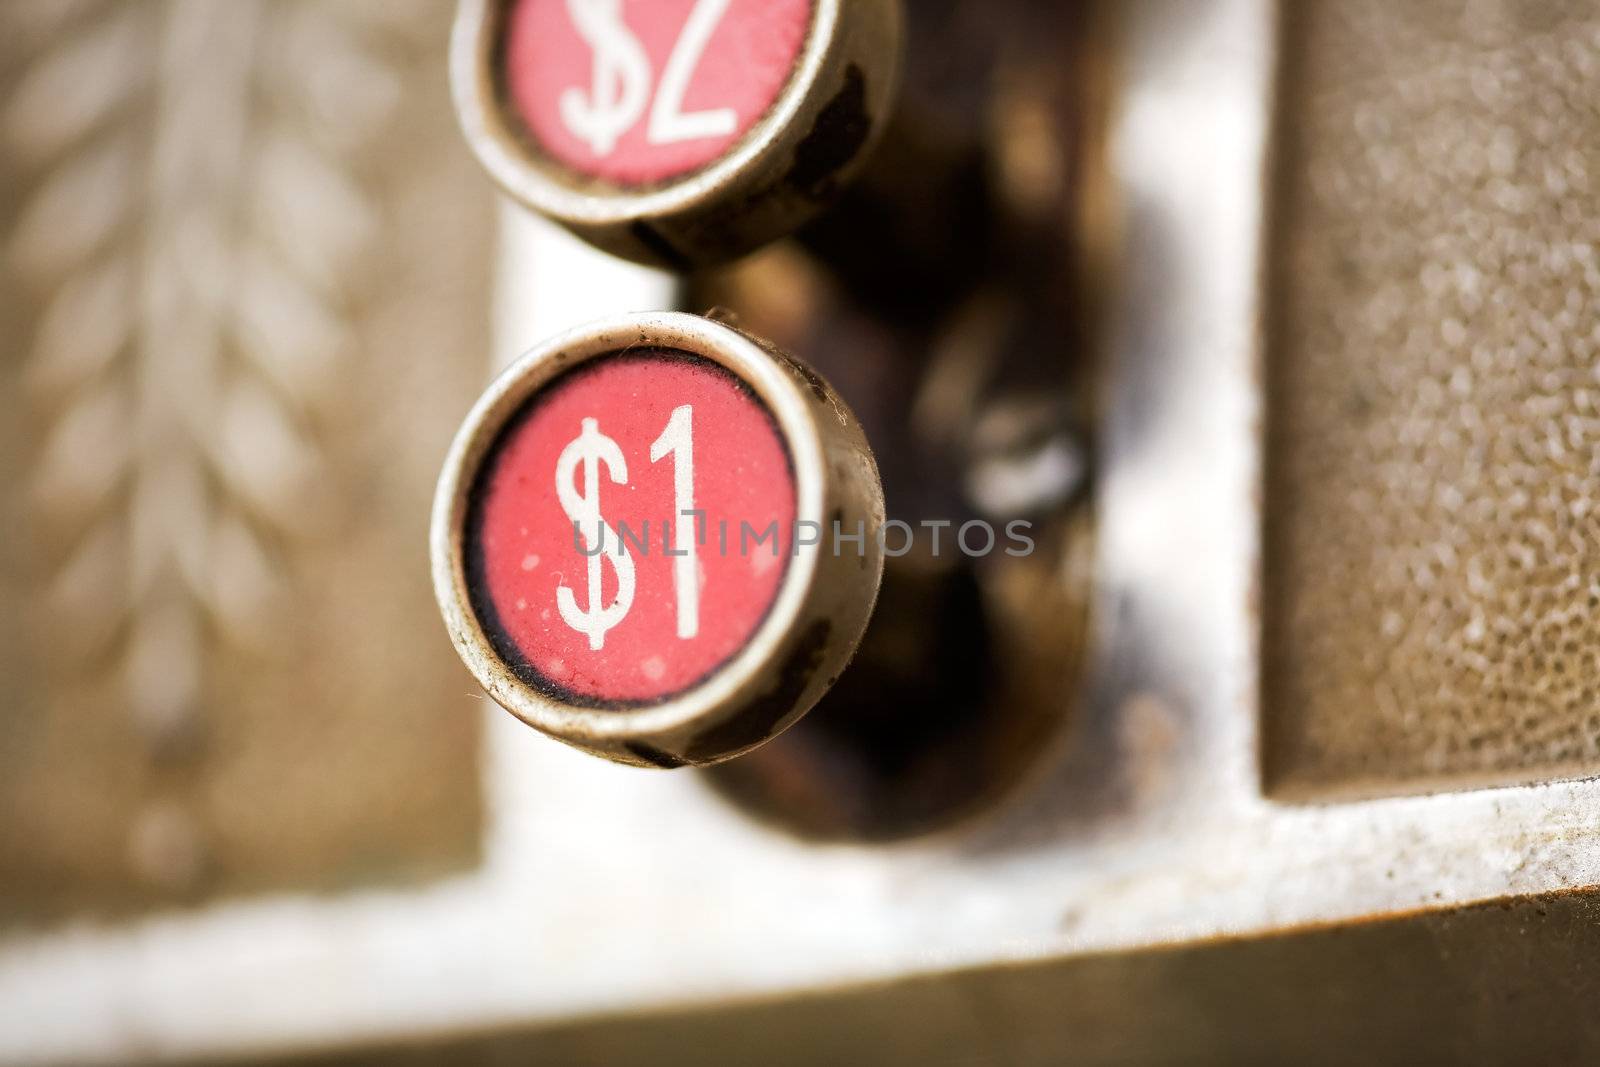 A one dollar button on a retro cash register - shallow depth of field.